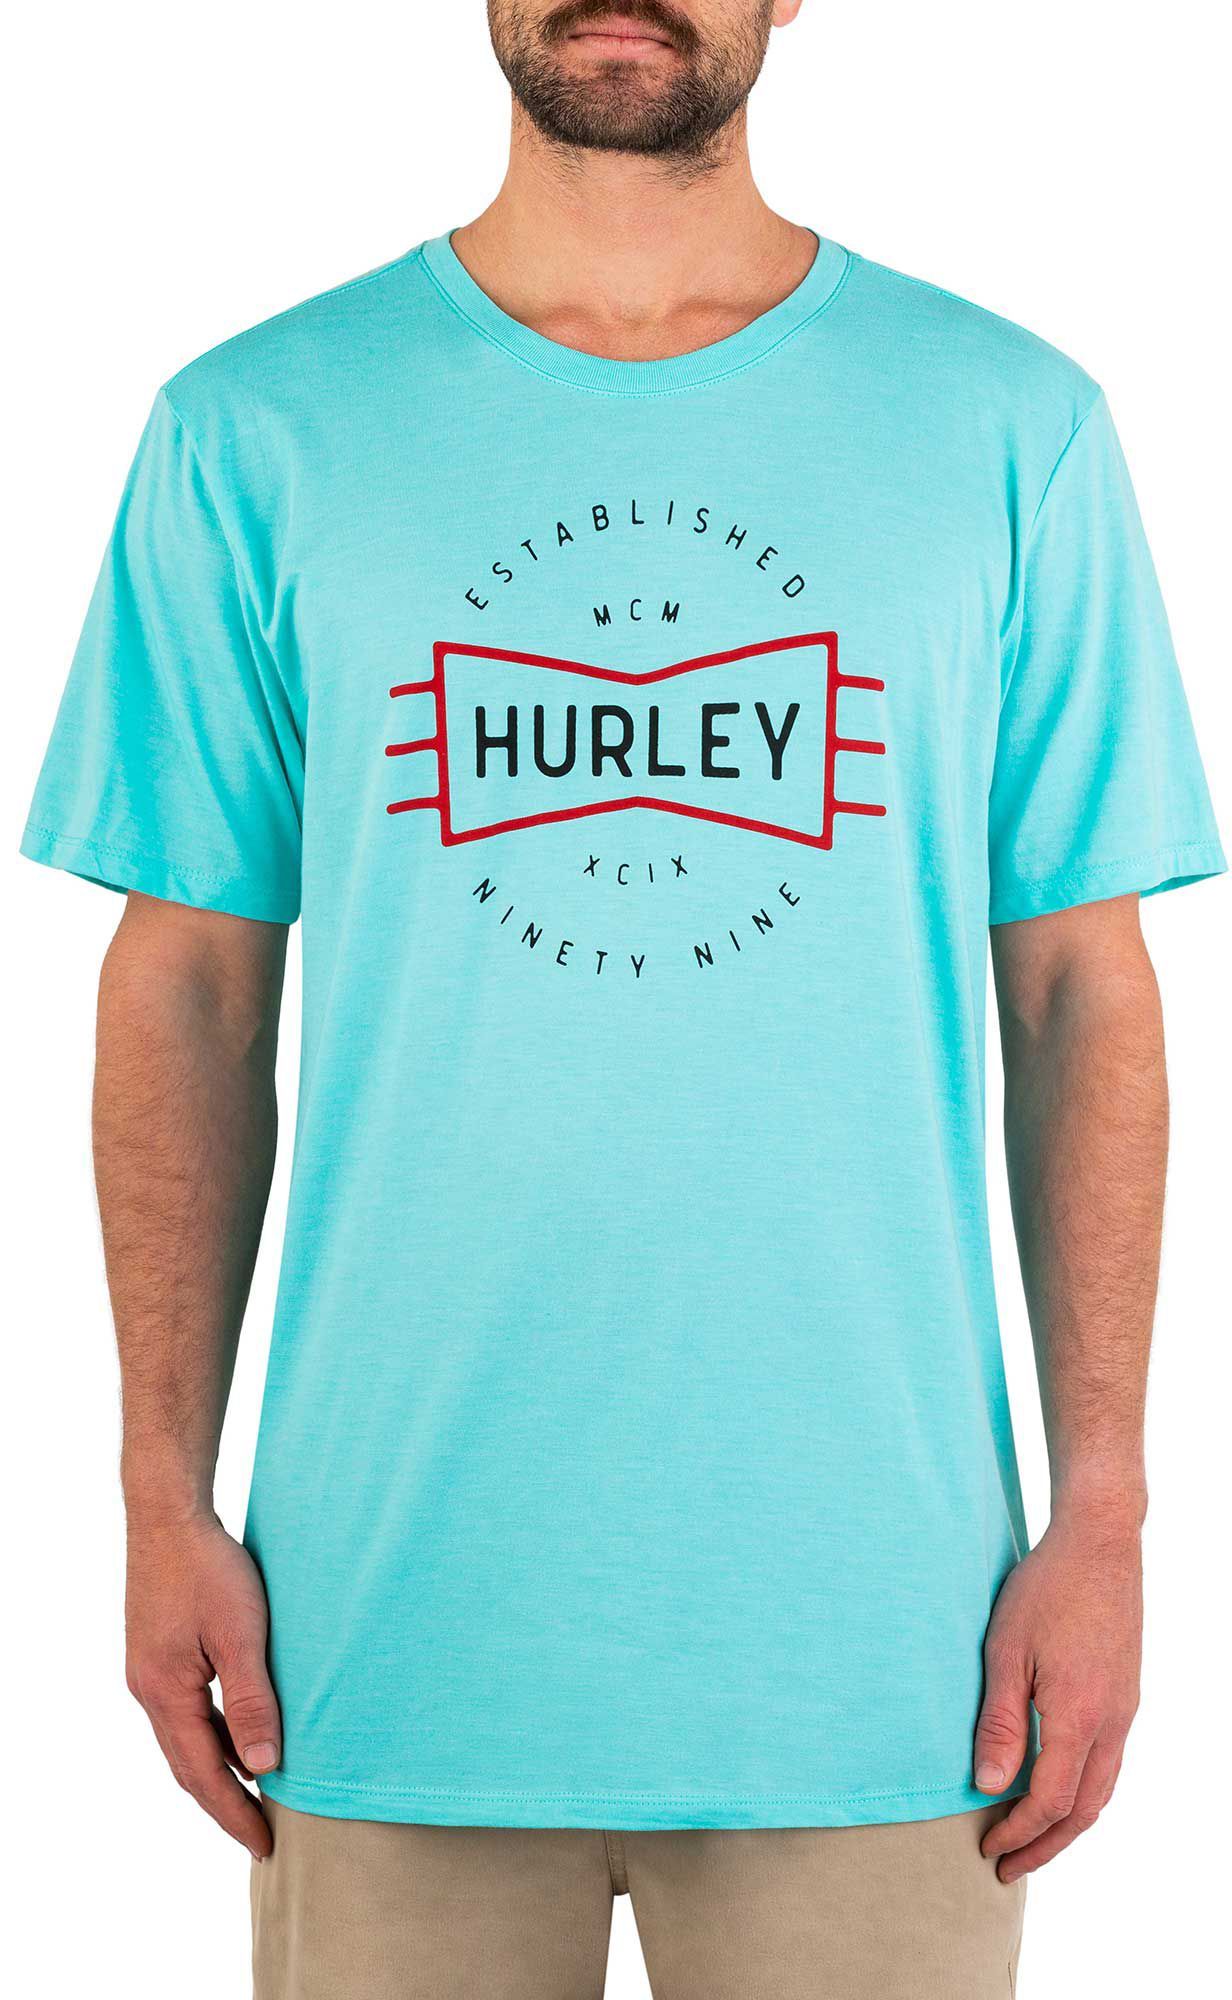 Hurley Men's Premium Bow Tie Short Sleeve Graphic T-Shirt, Small, Green | Dick's Sporting Goods